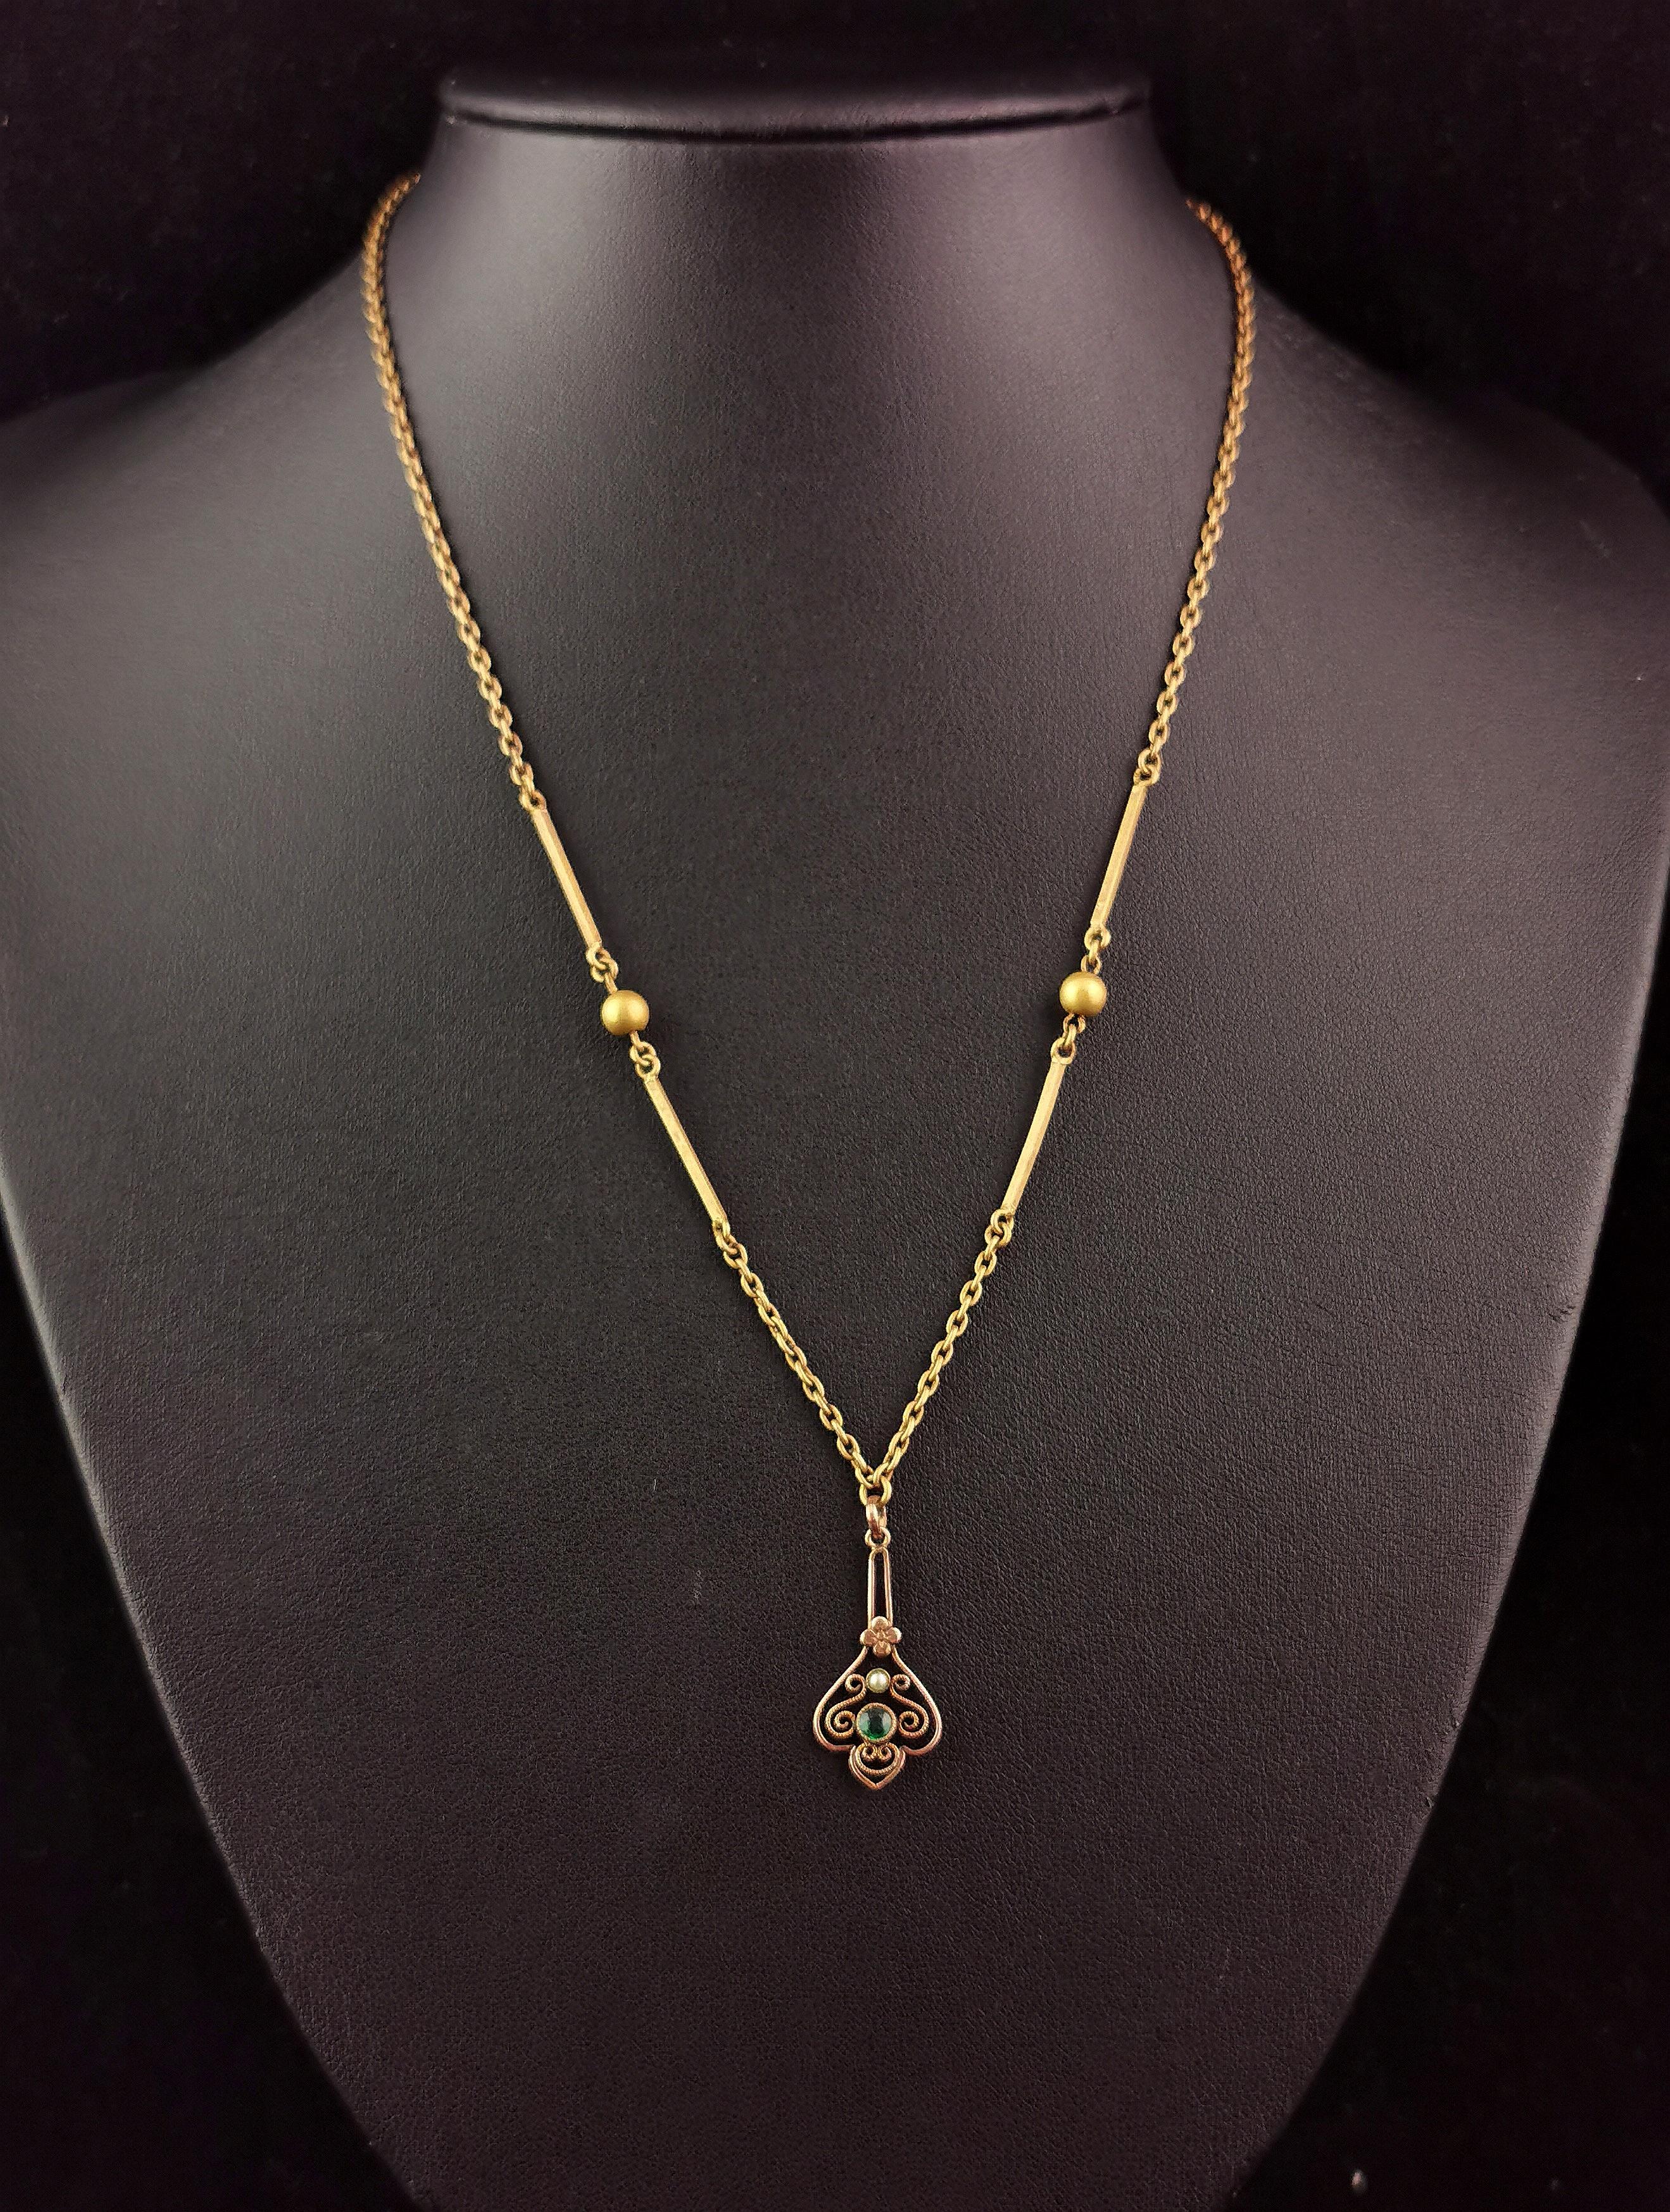 A beautiful antique, Edwardian era pendant necklace.

The chain is a rolo link chain in gilt plated brass, the chain intercepted with fancy bar and ball links.

It has a small gilt metal pendant suspended, an openwork design set with a rich green